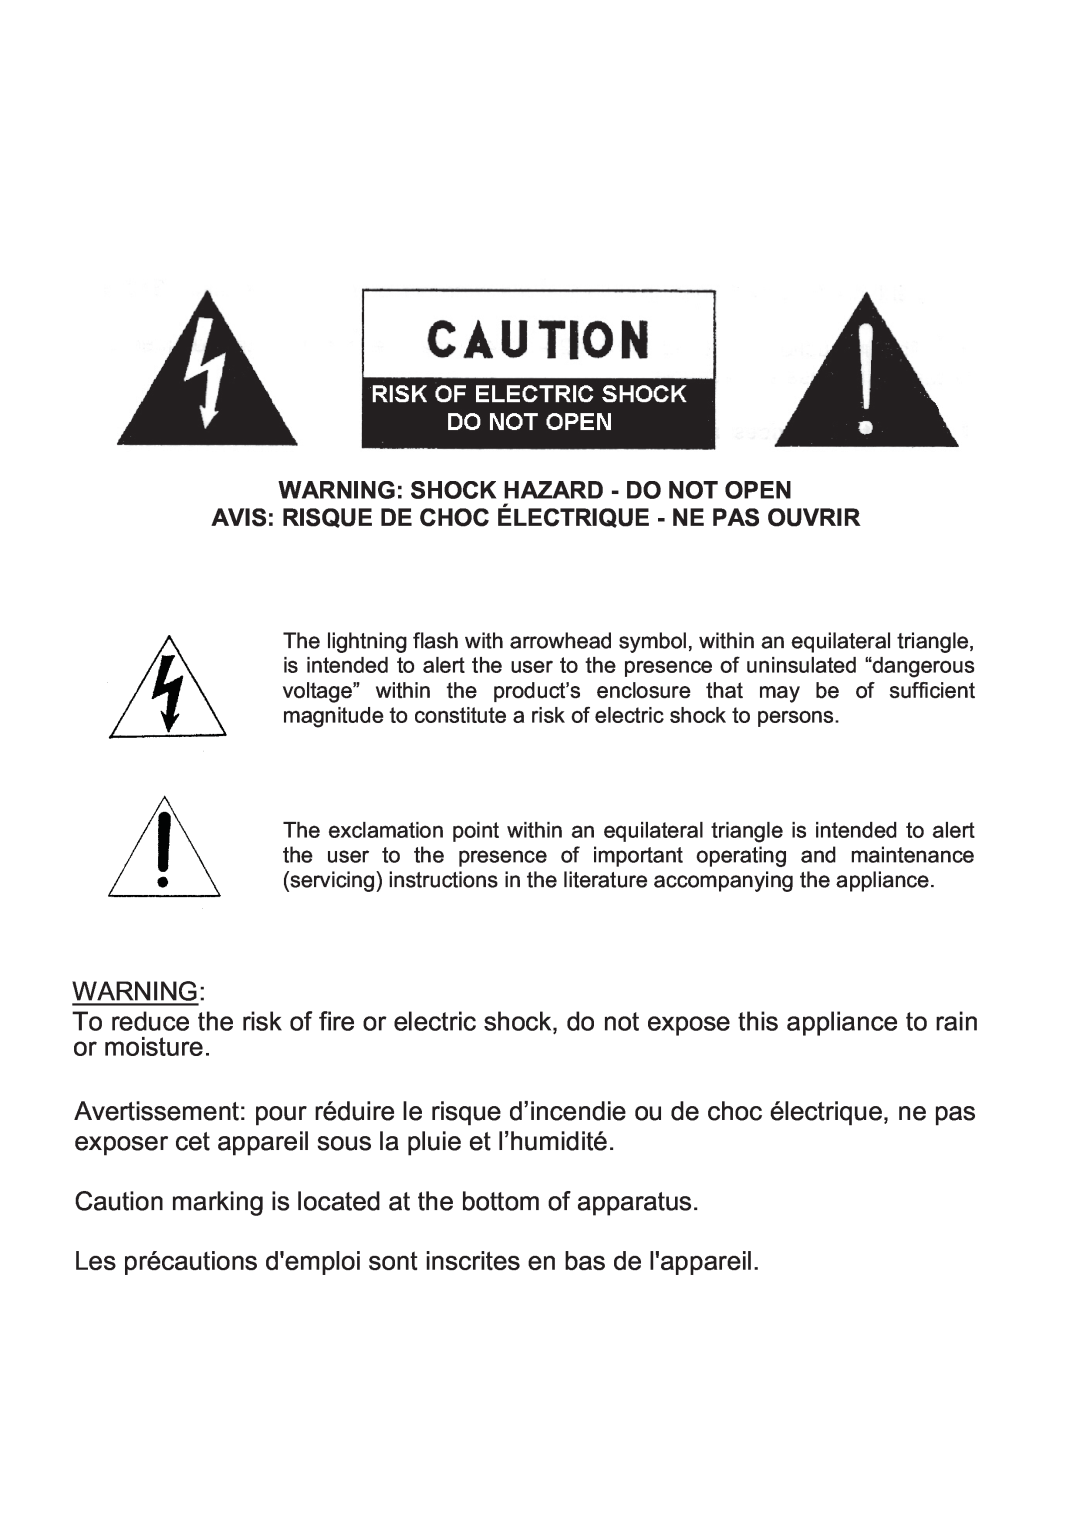 Oregon Scientific WS902H user manual Caution marking is located at the bottom of apparatus 